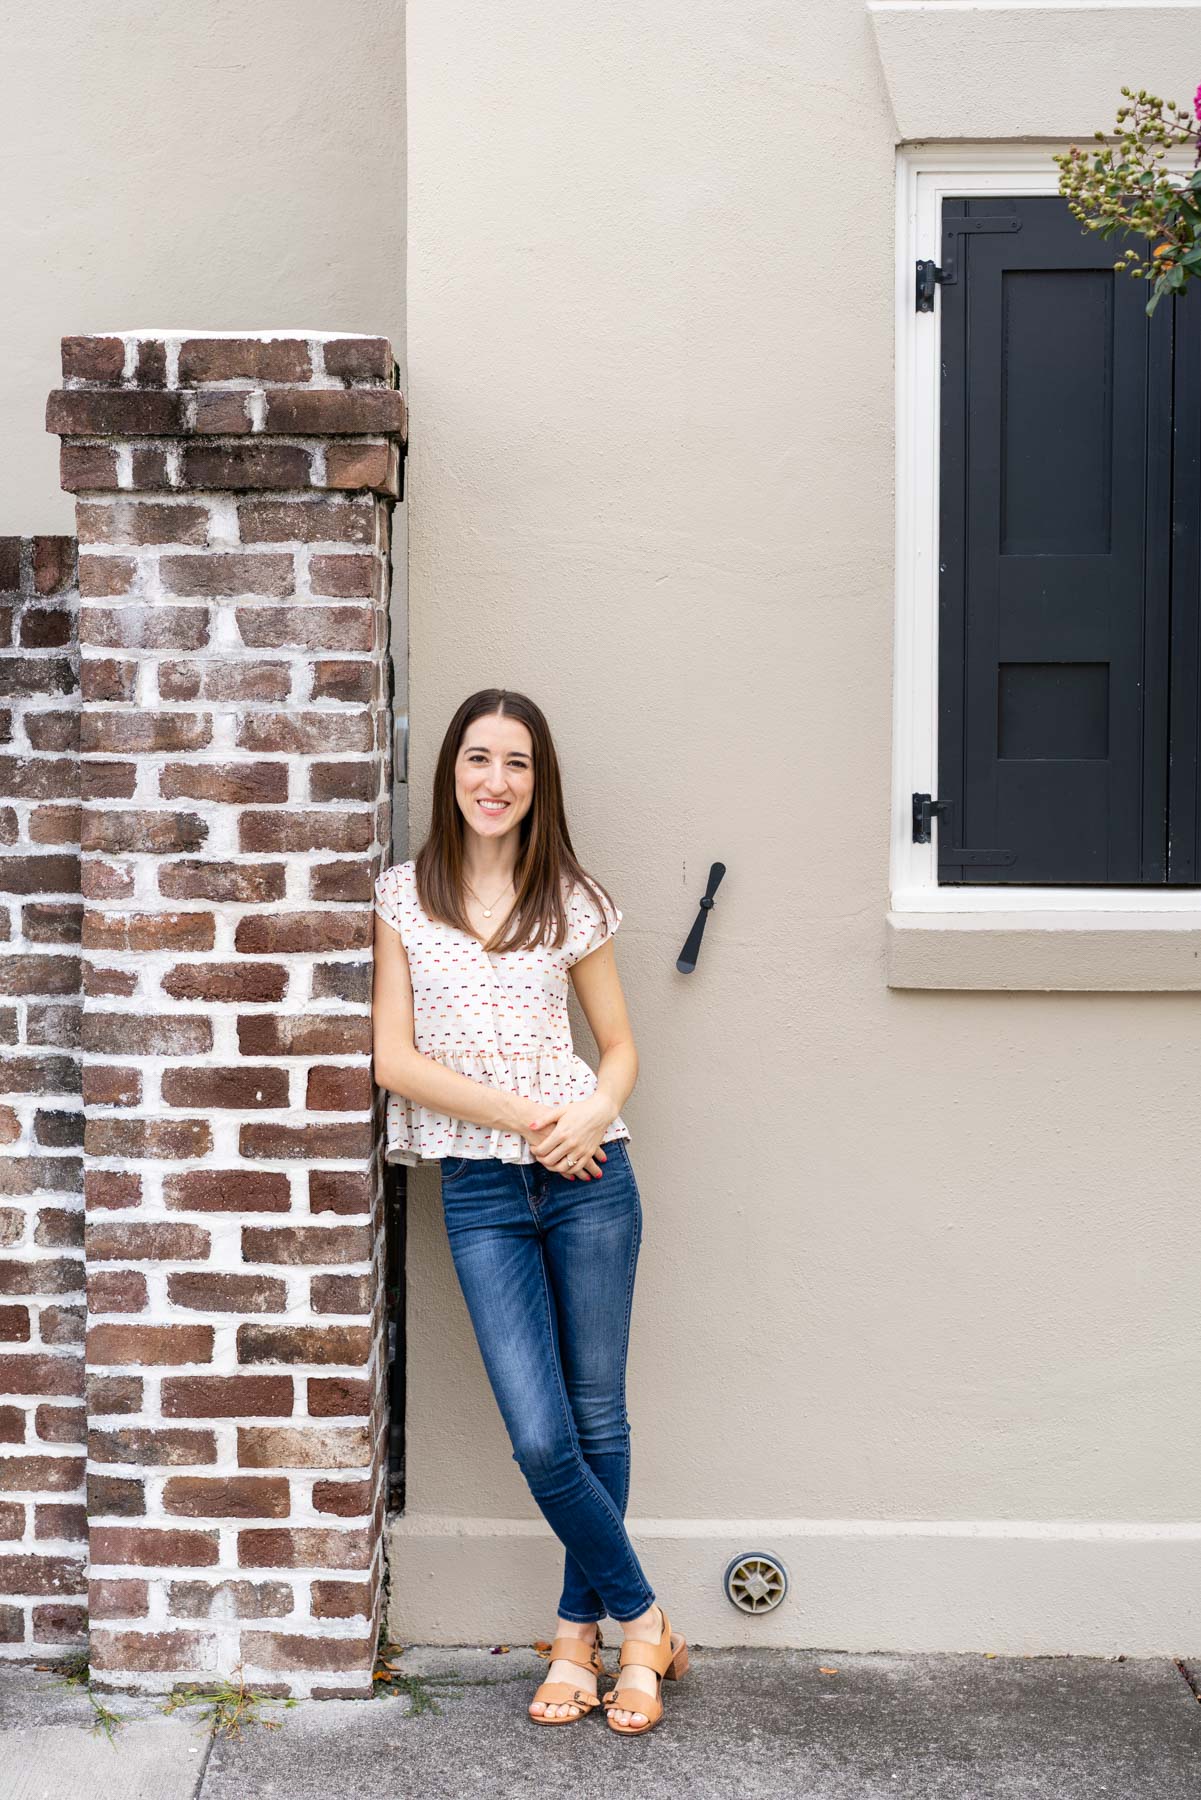 Woman in denim jeans and a white blouse demonstrating how to pose for a photoshoot by crossing her ankles and lightly leaning against a brick wall